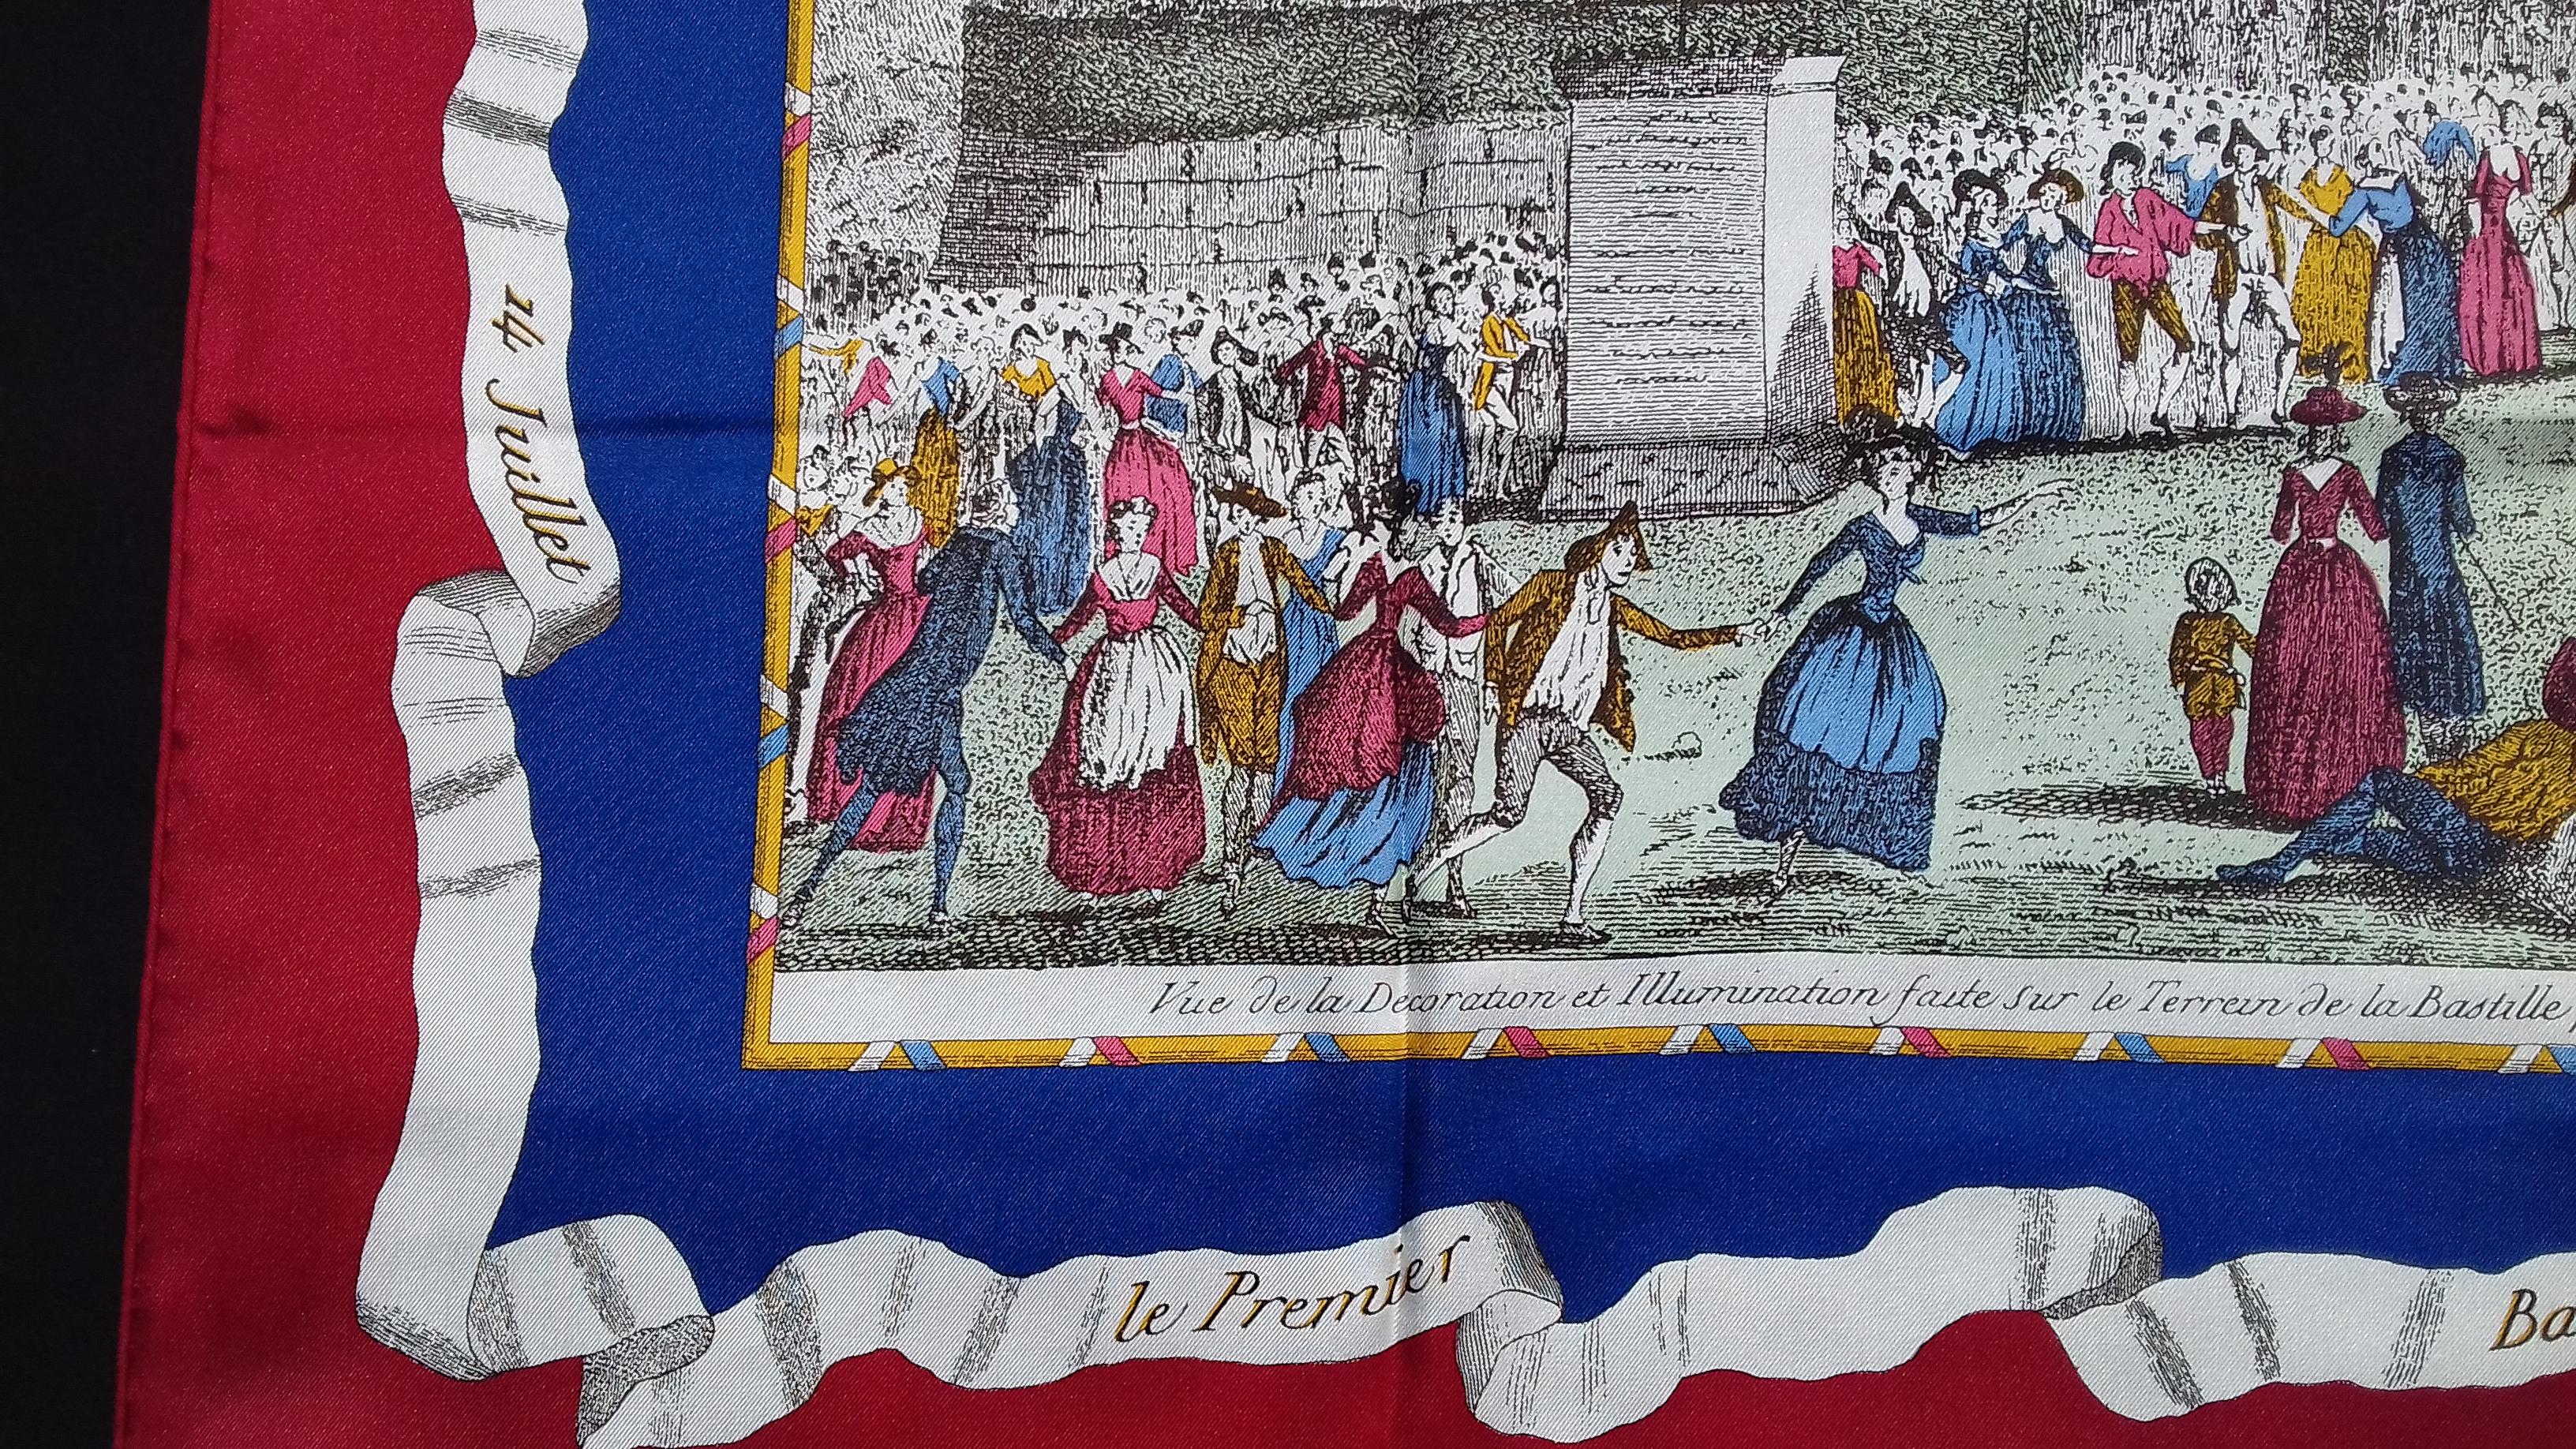 Beautiful Scarf edited for the bicentenary of the French Revolution

Title: Le Premier Bal du 14 Juillet (The First Ball of July 14)

On July 14, 1789, the people invaded the Bastille, becoming a symbol of the French Revolution, ending the reign of